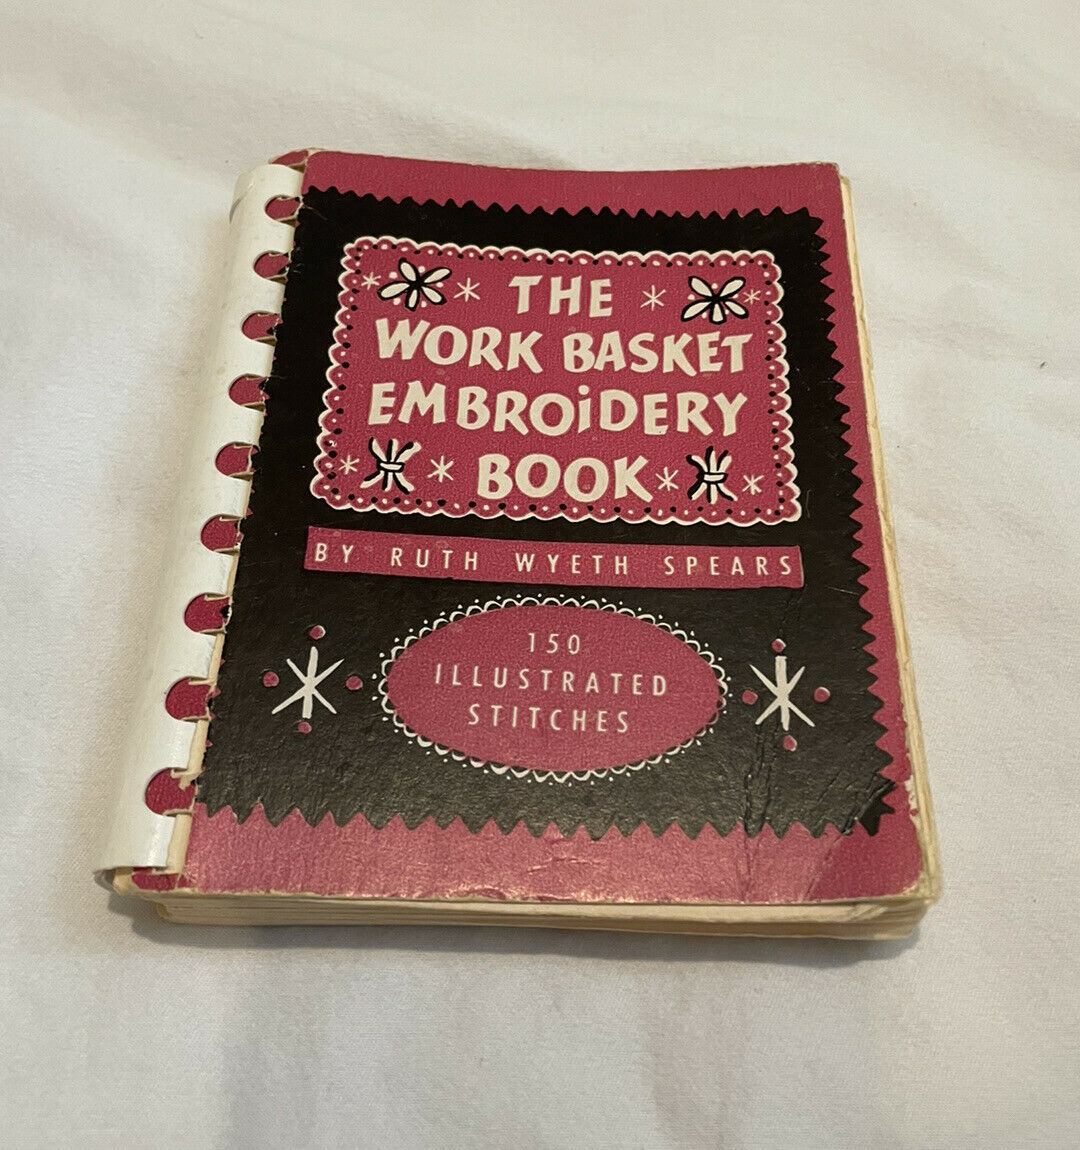 Work Basket Embriodery Book 150 Illustrated Stitches Ruth Wyeth Spears 1954